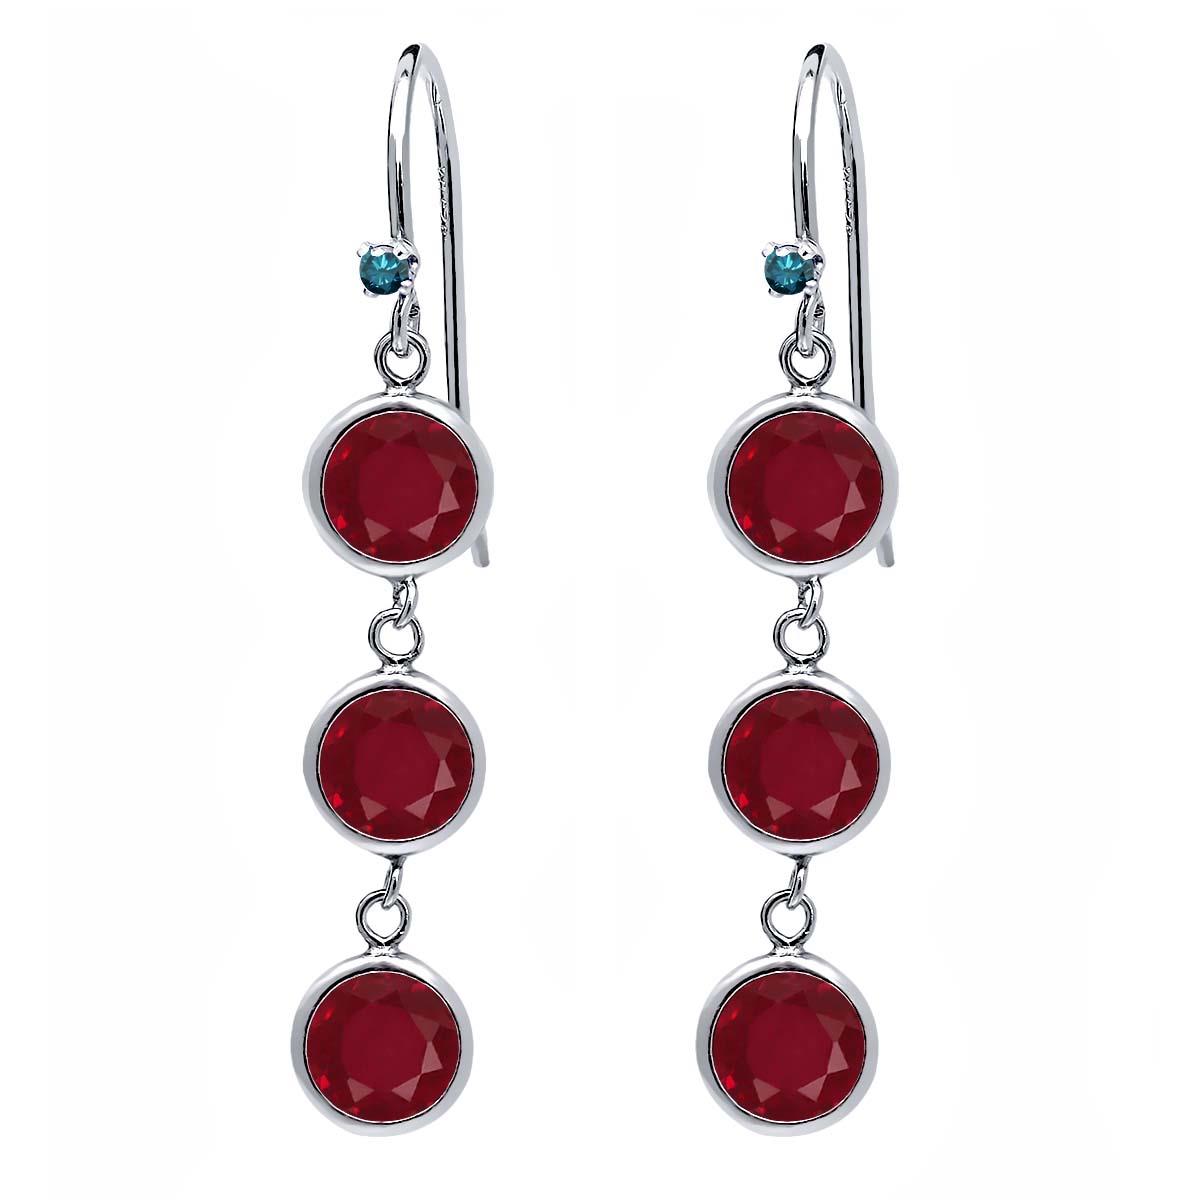 3.39 Ct Round Red Ruby Blue Diamond 925 Sterling Silver Earrings